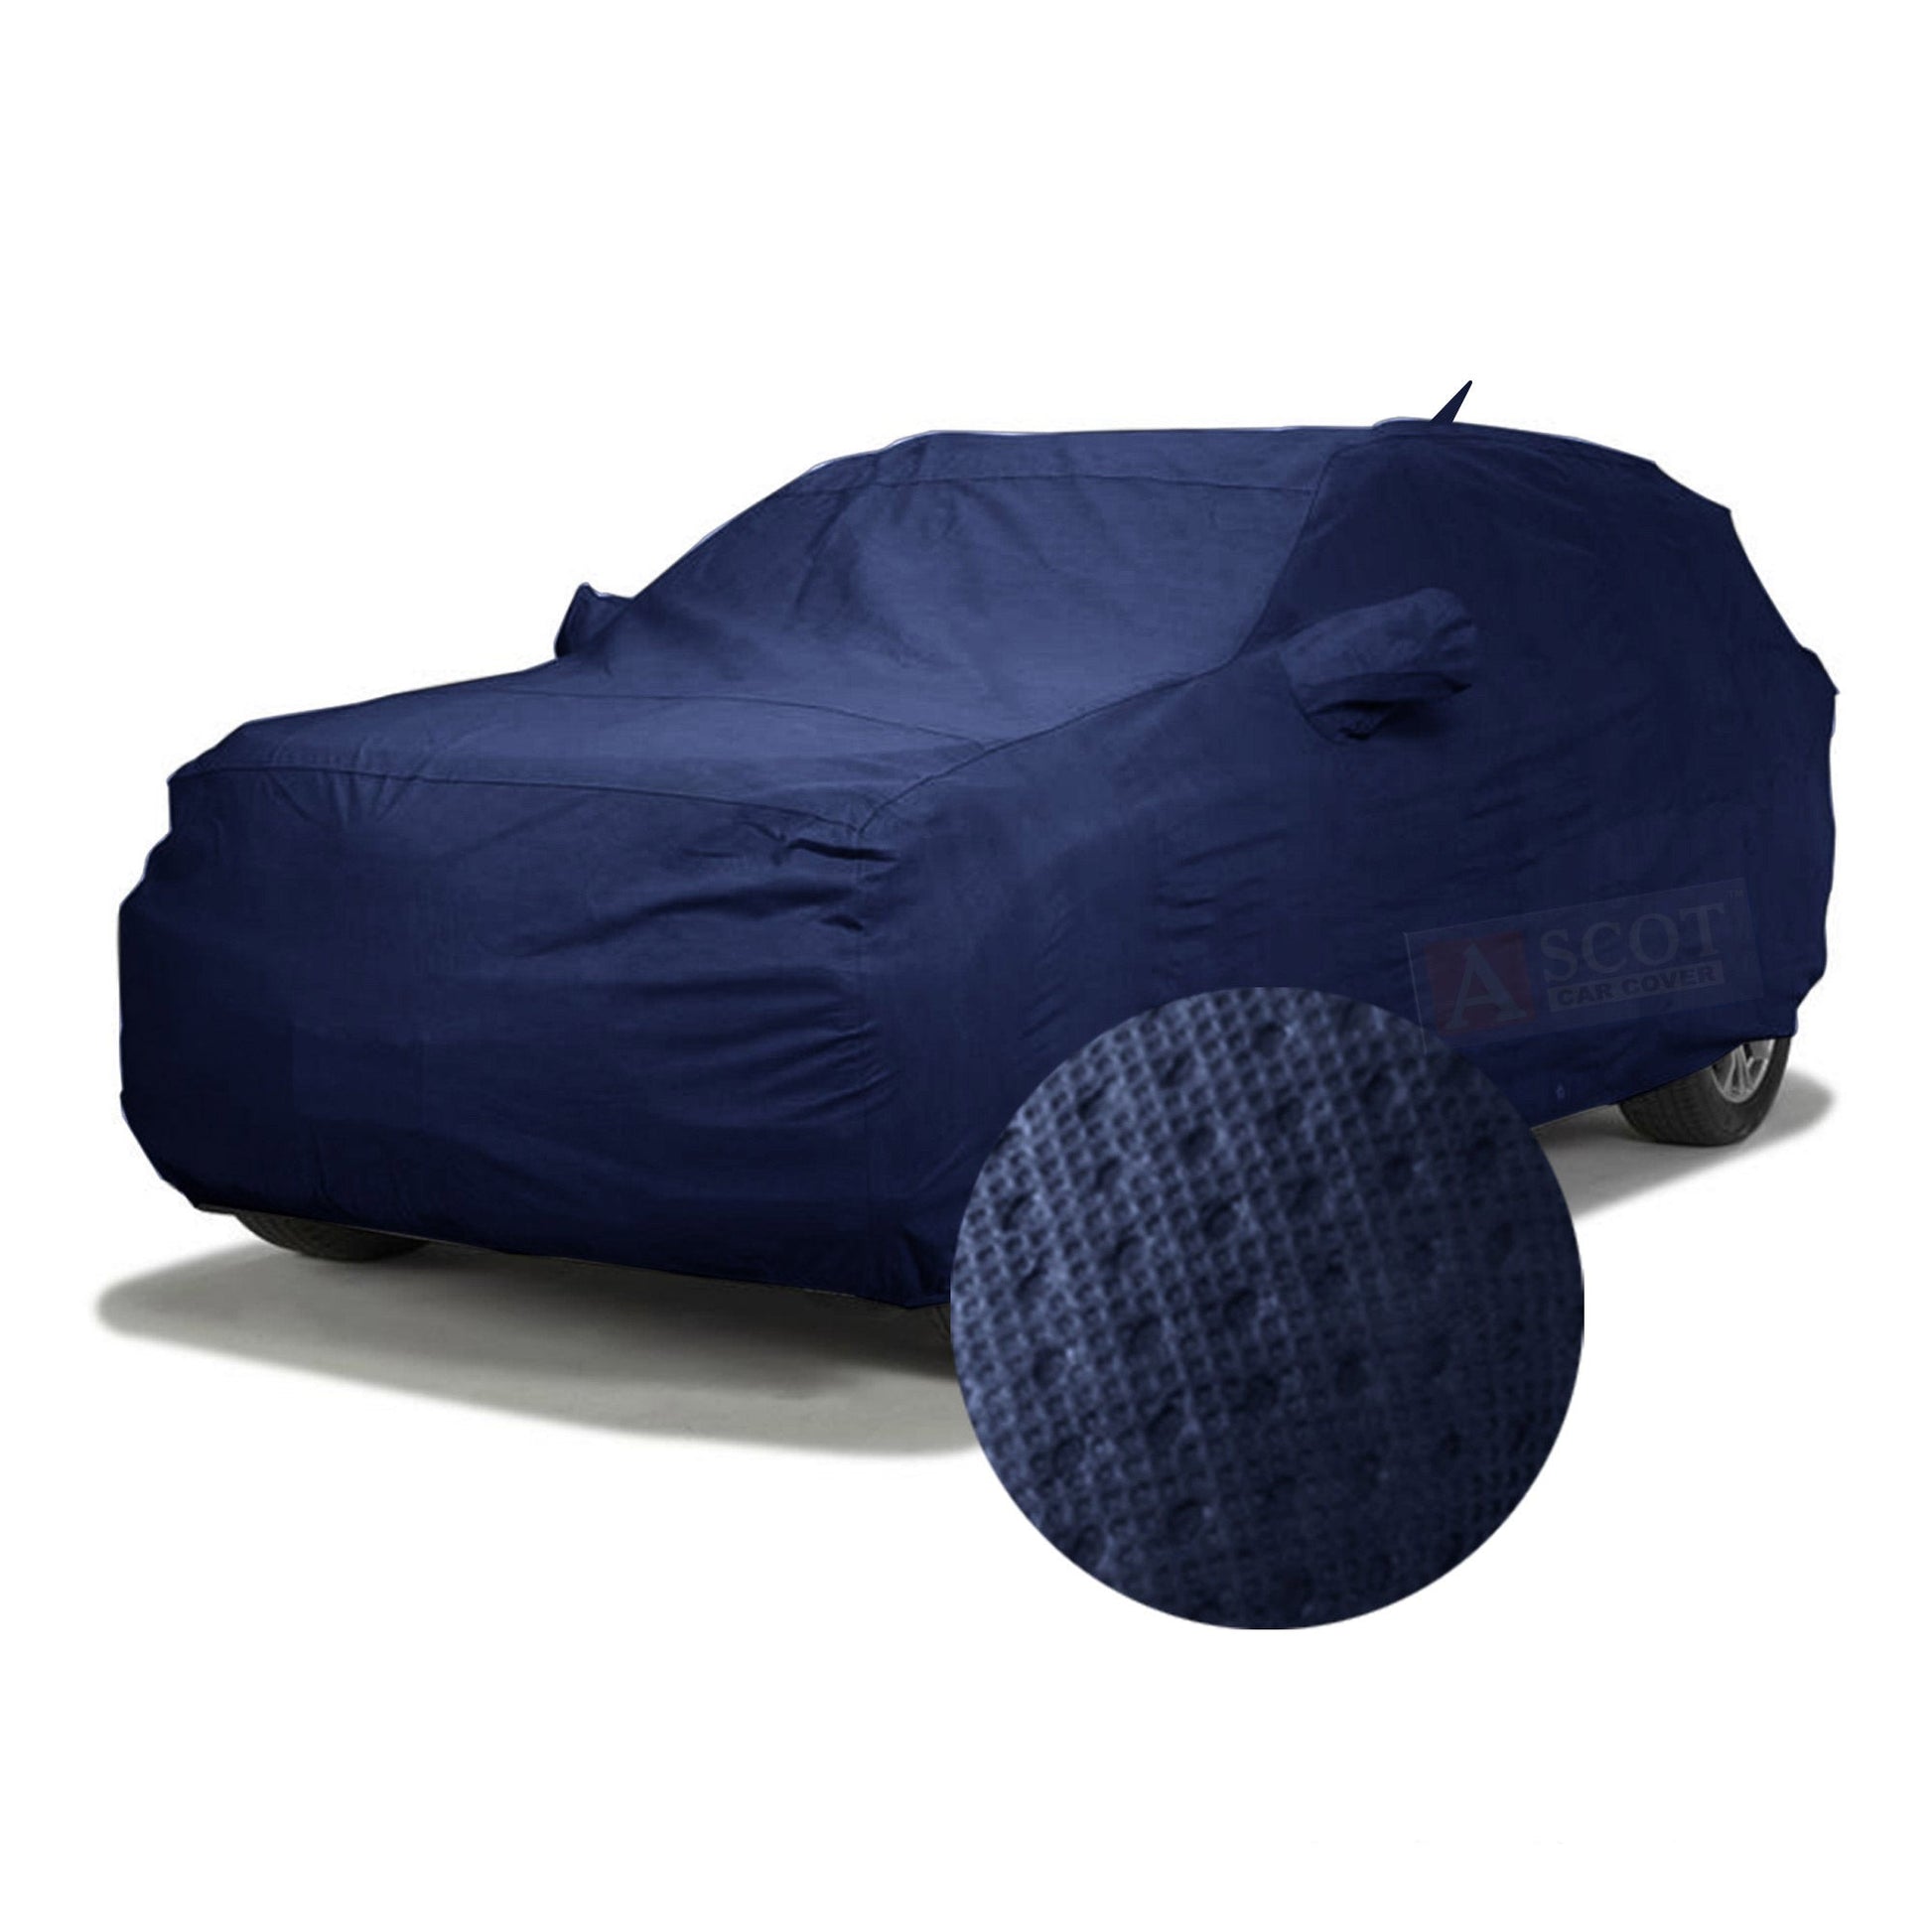 AutoBurn Car Body Cover for Volkswagen T-Cross With Mirror Pocket  (Blue,Blue)(for All